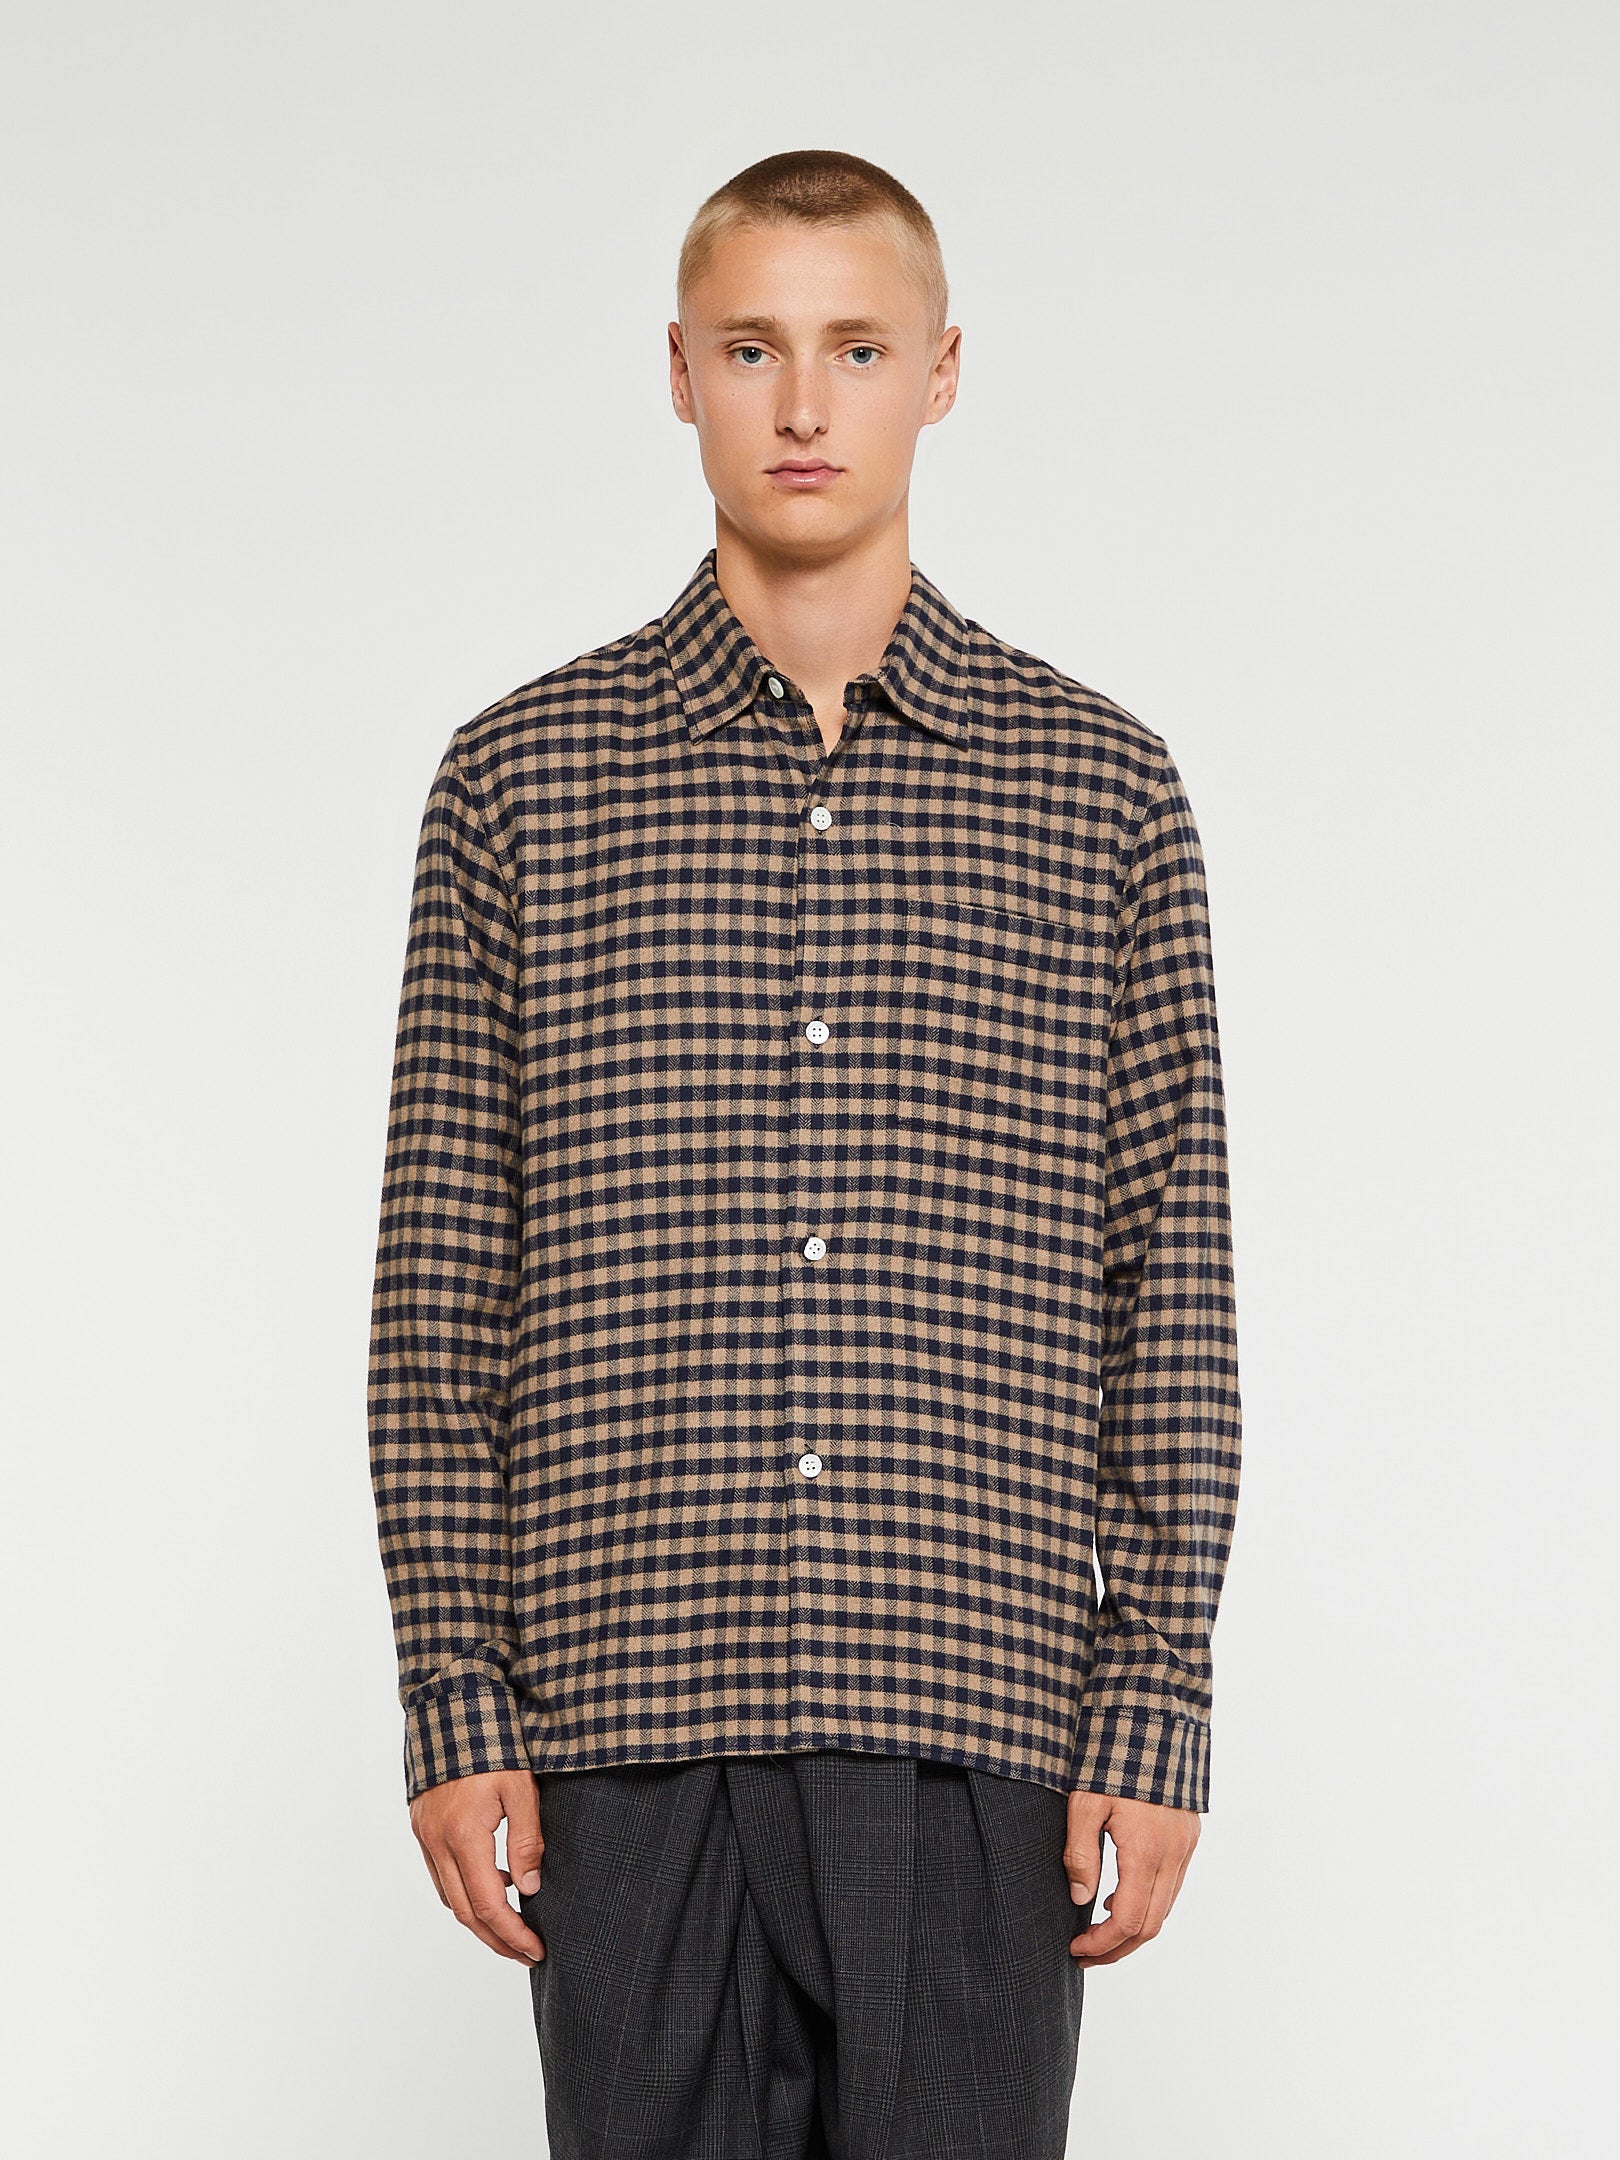 Another Aspect - Shirt 4.0 in Navy Check